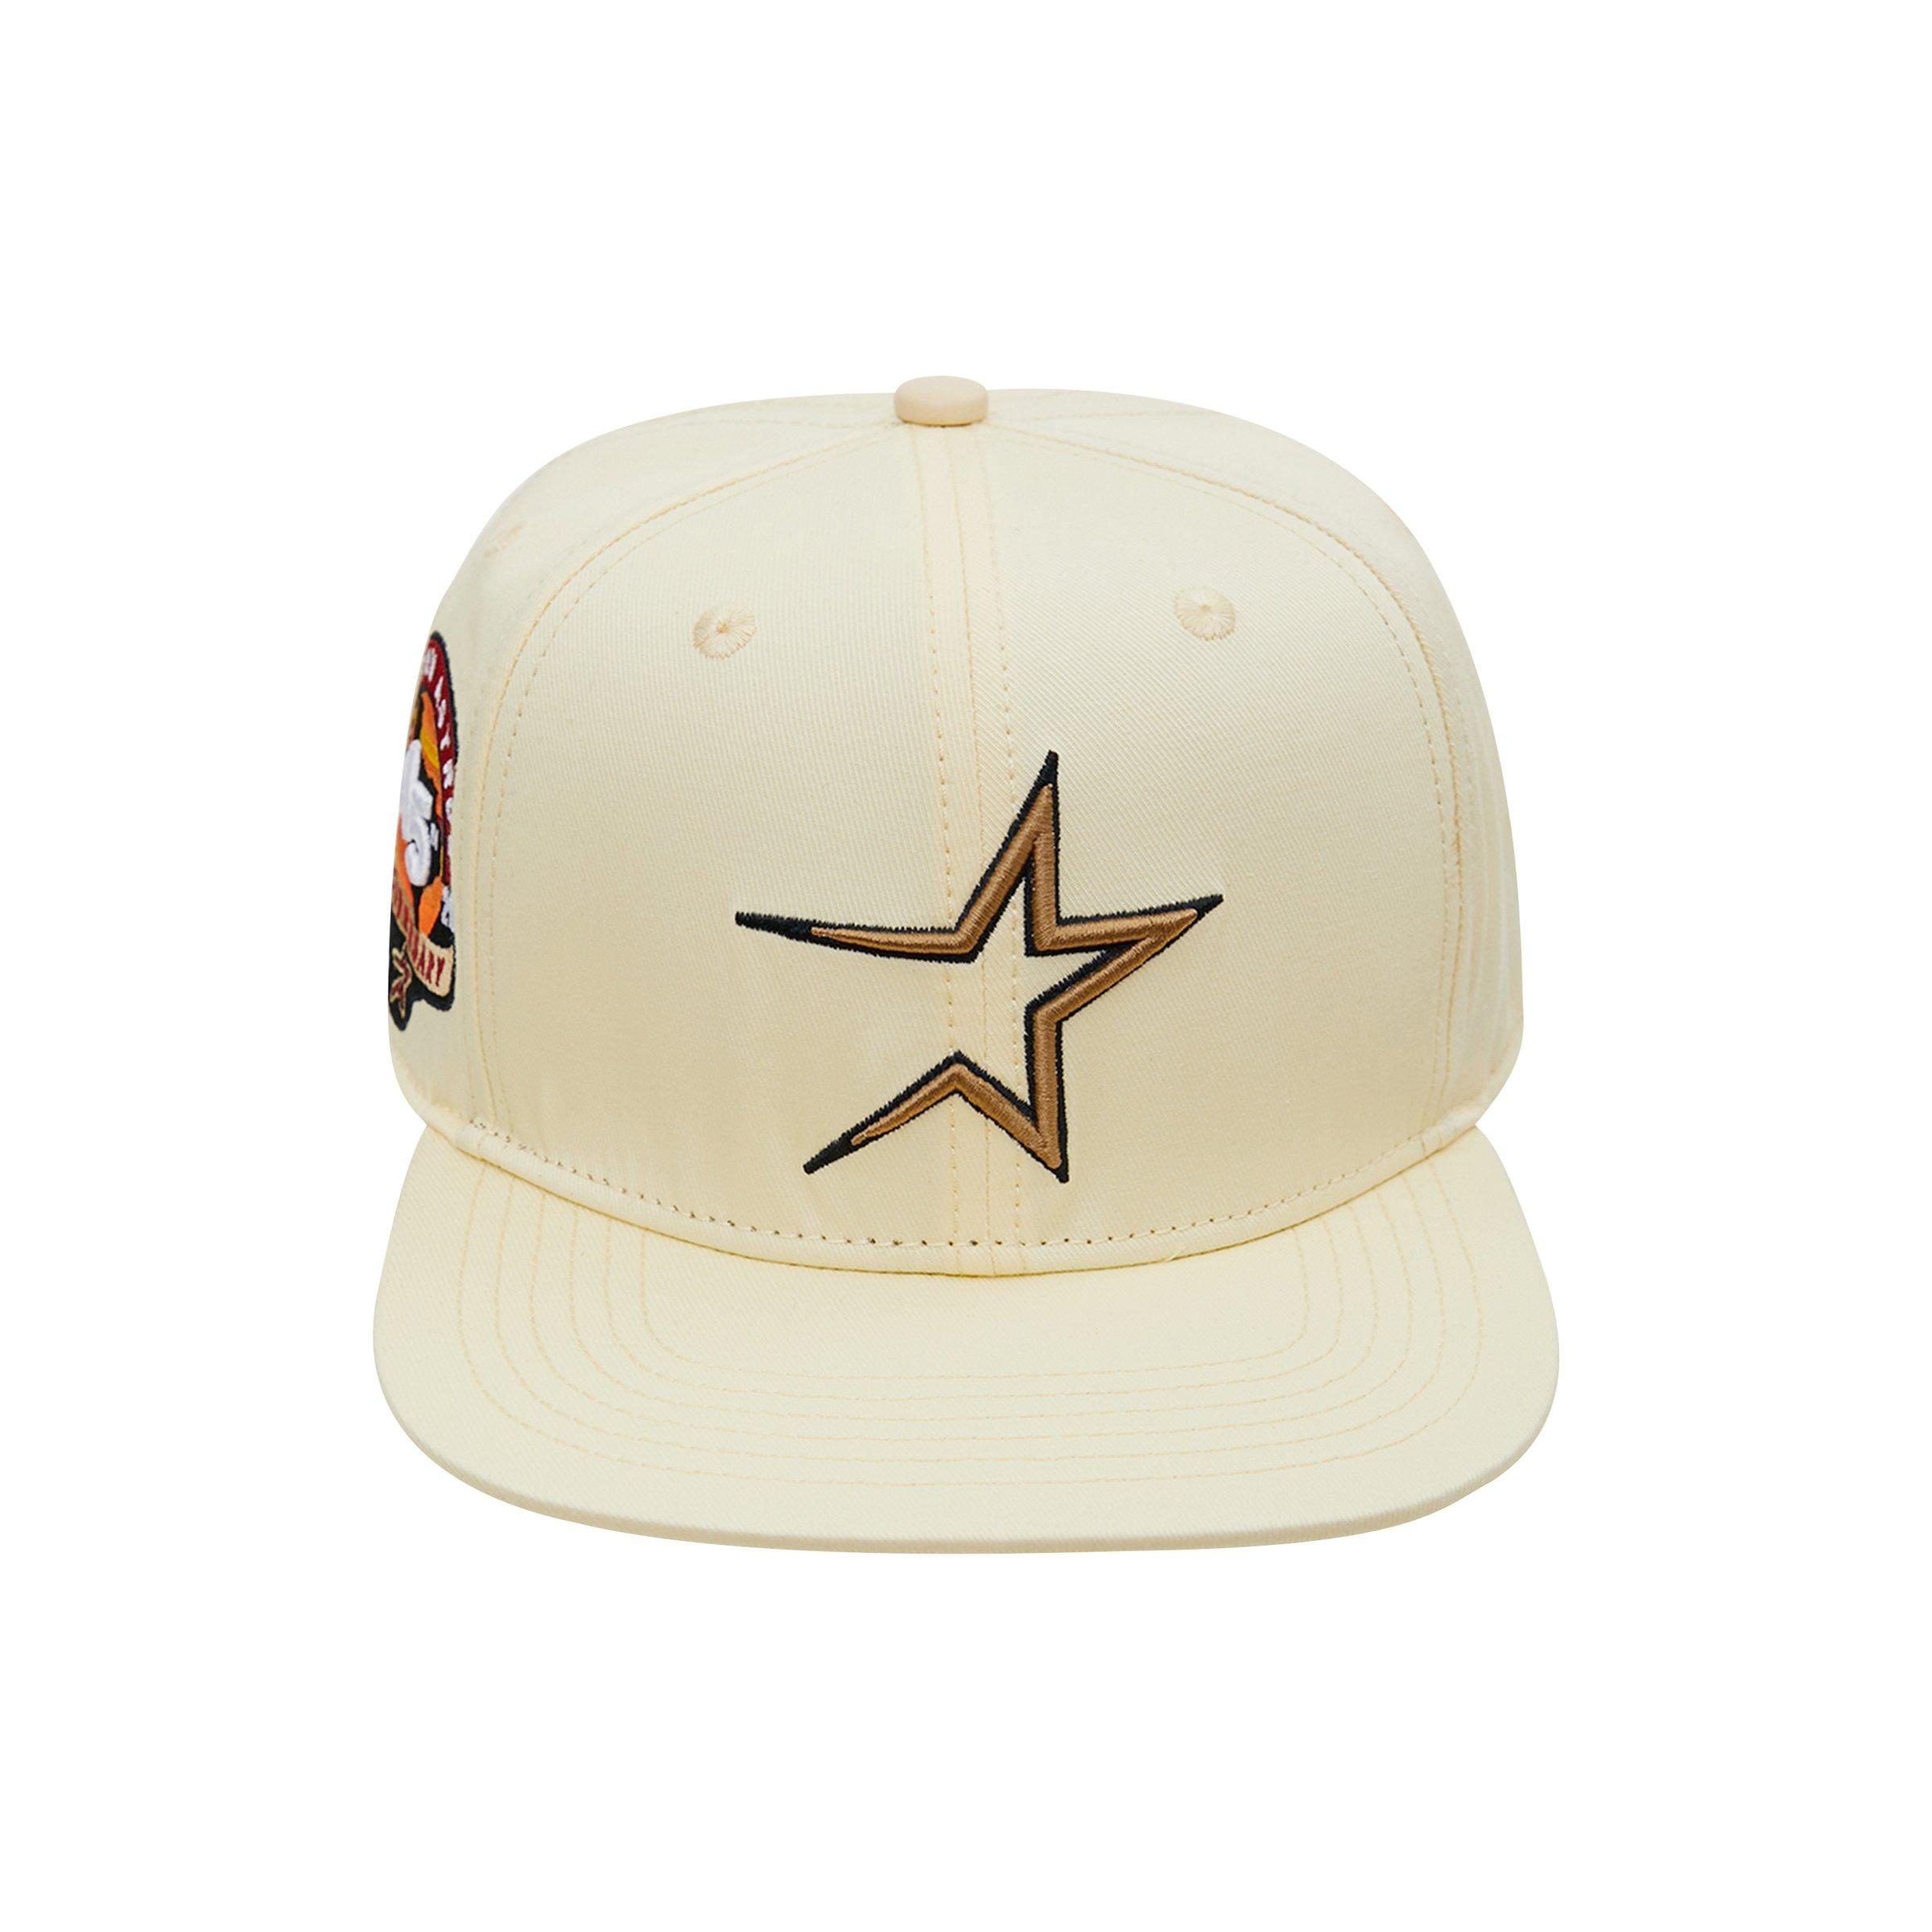 Houston Astros - 😍 Gold gear available at the Team Store at MMP starting  at 12:01am on Monday and will be open for 24 hours, closing at 11:59pm. 🏆